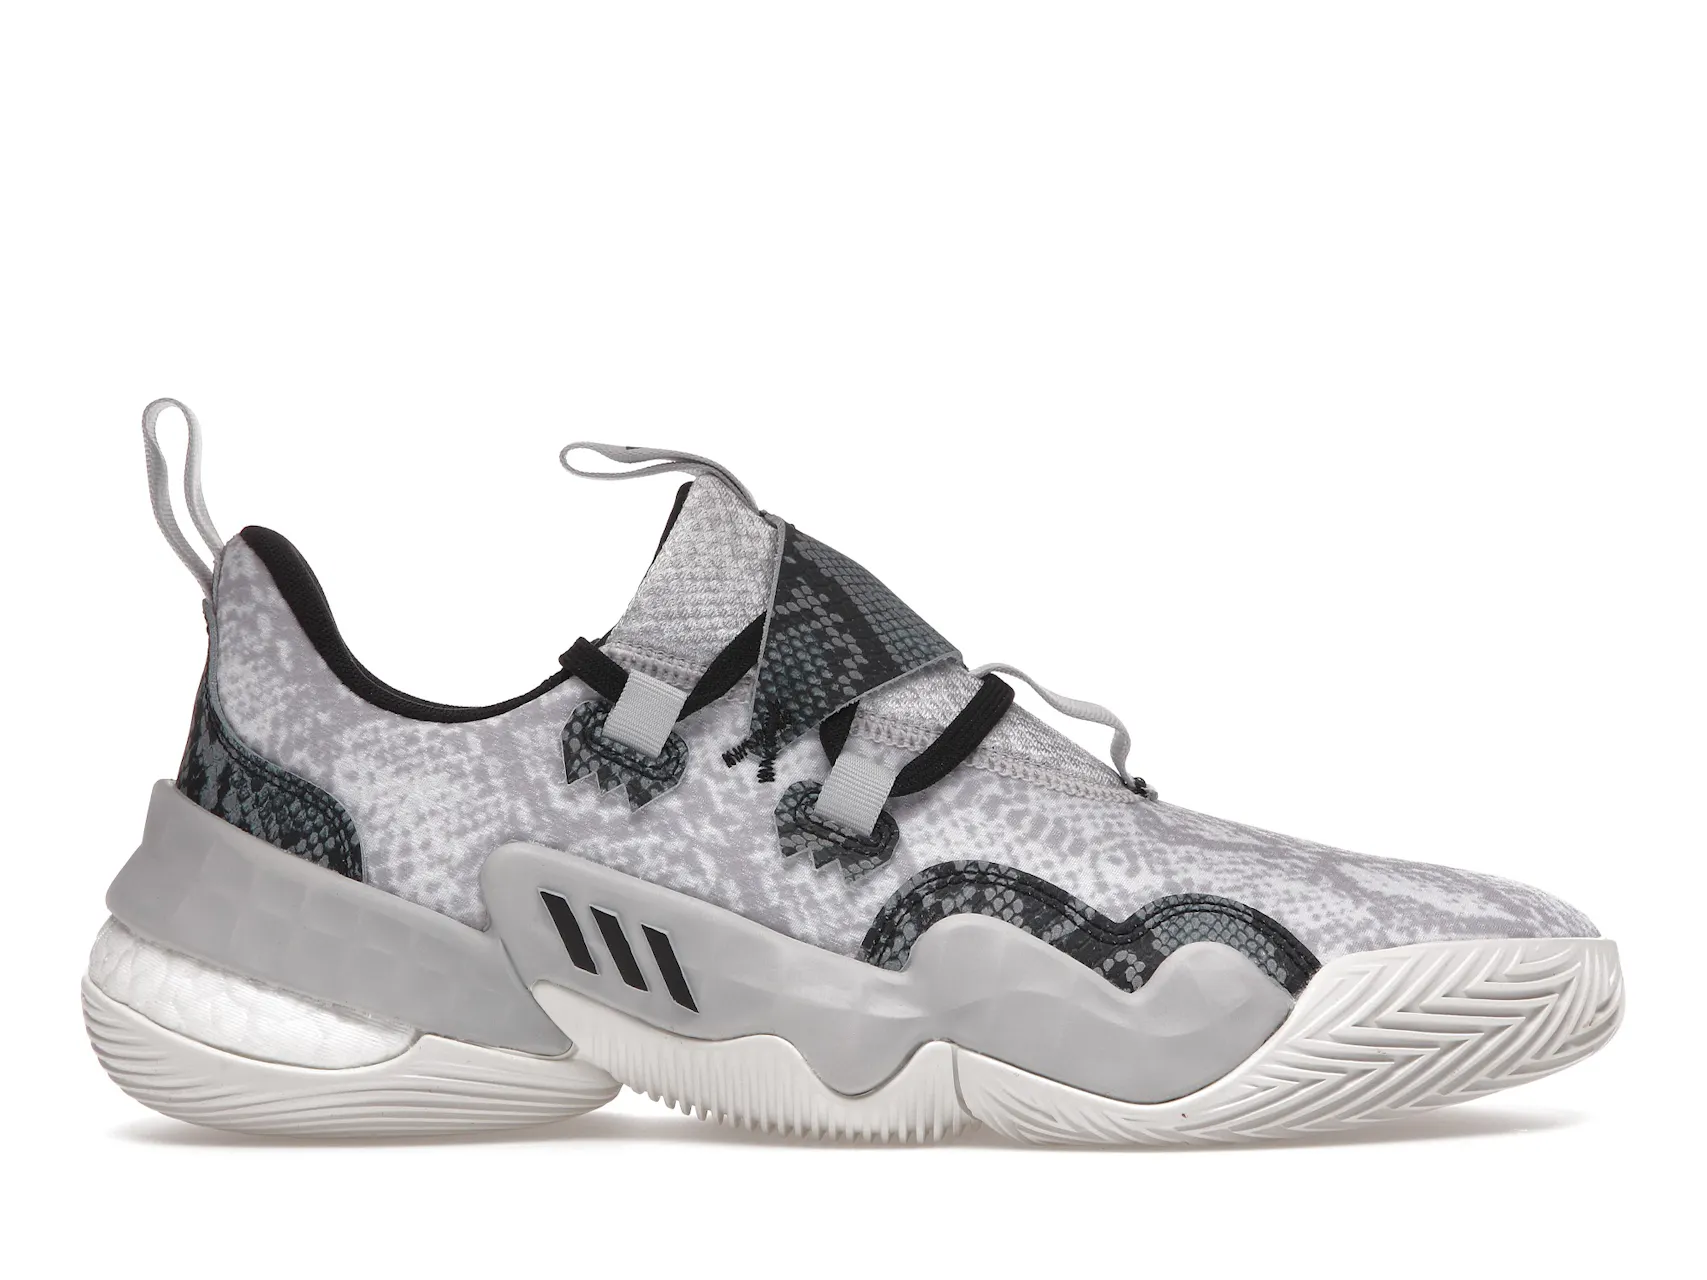 adidas Trae Young 1 Light Solid Grey Snakeskin - H67753 - US